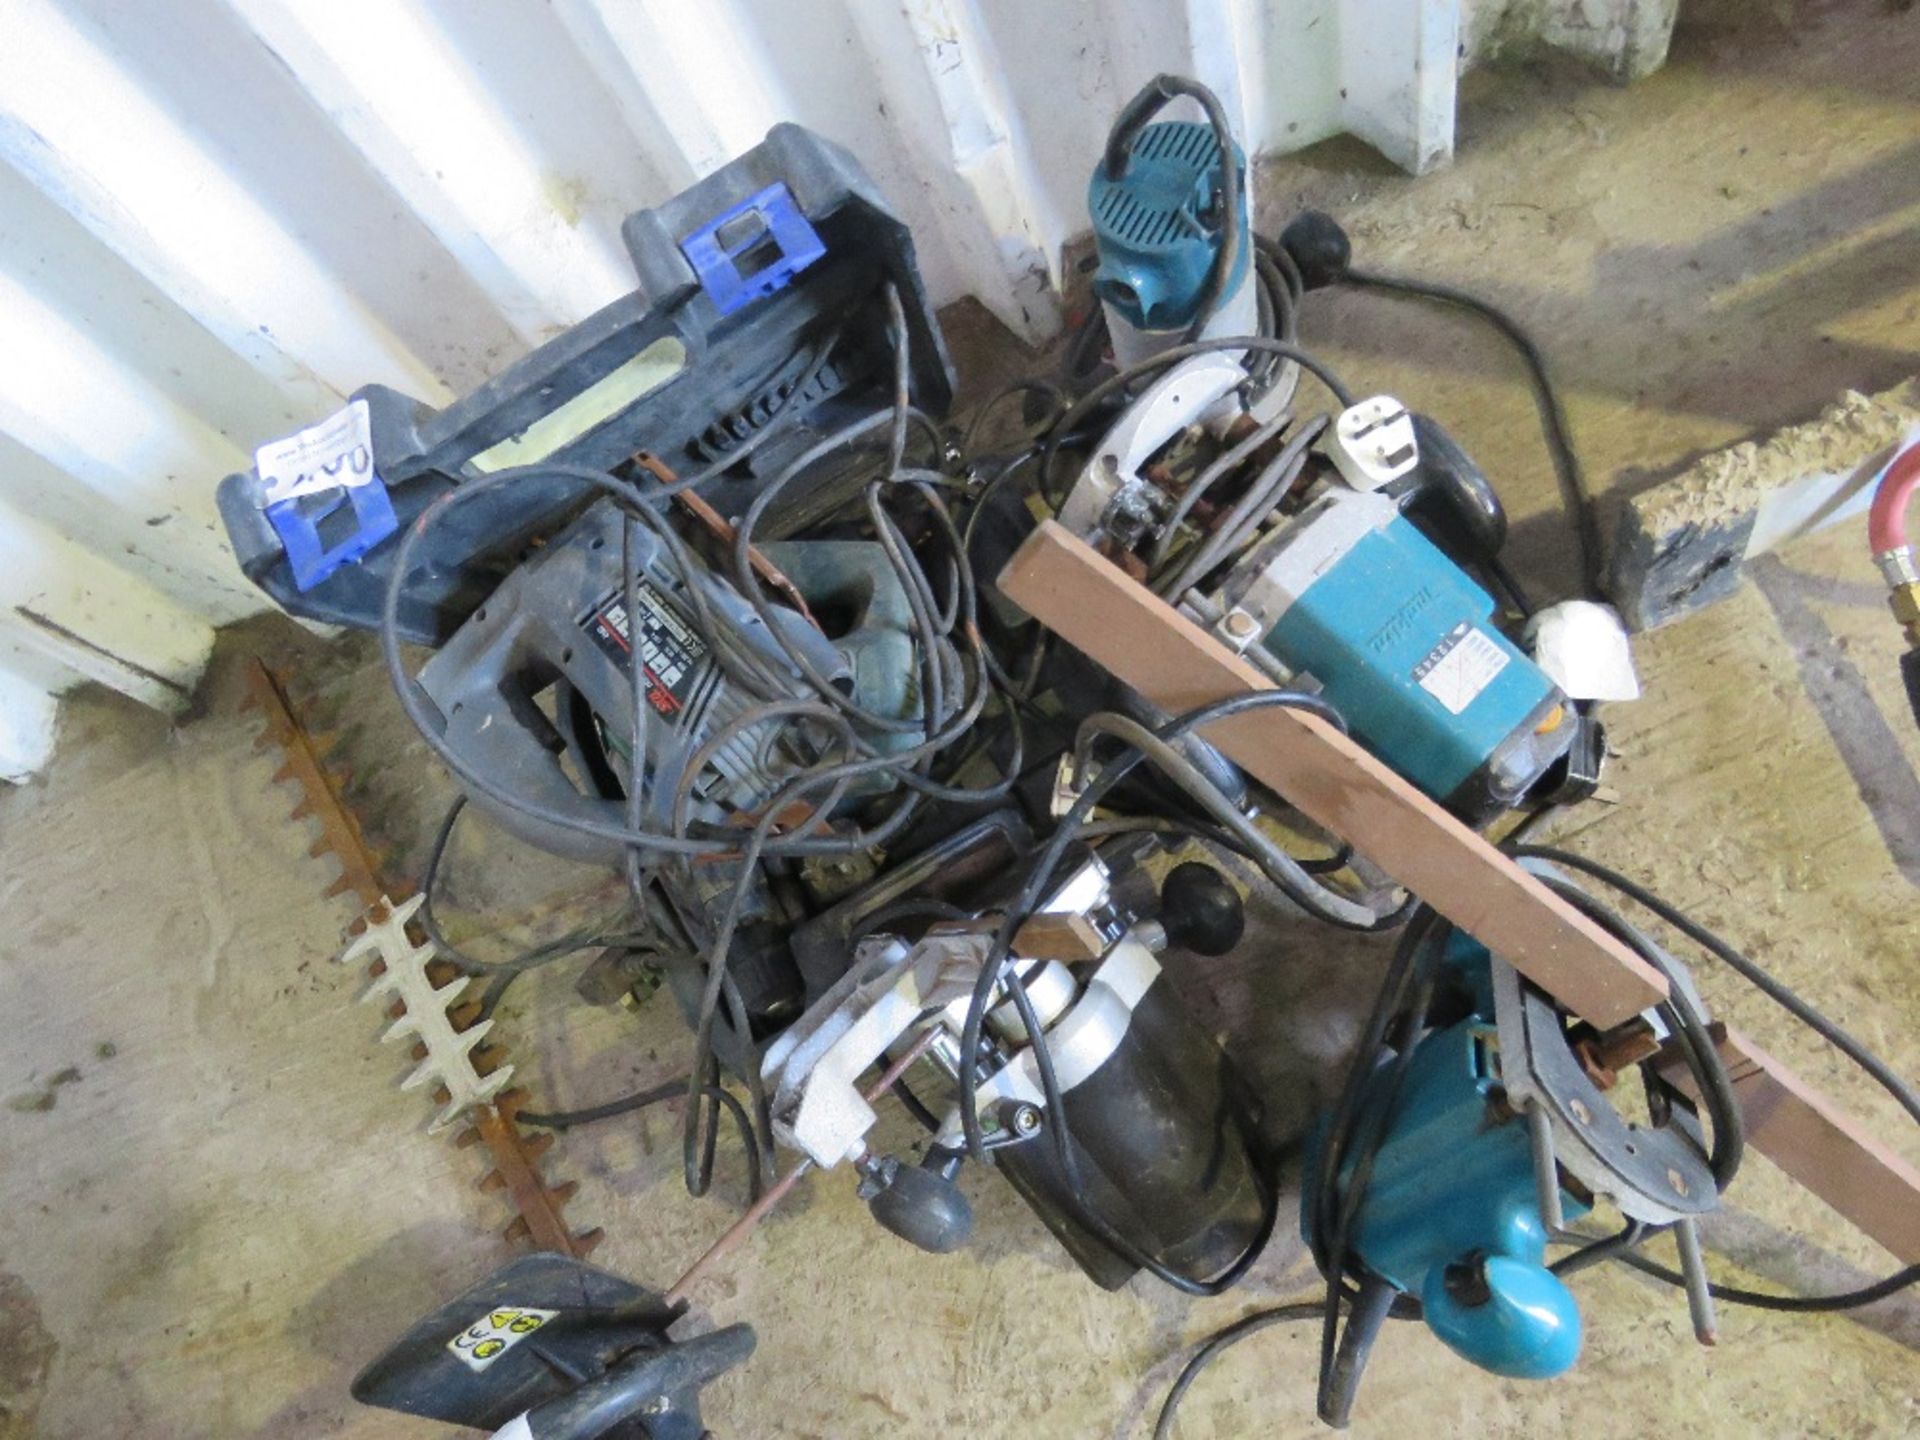 4 X ROUTERS, 2 X JIGSAWS PLUS A BATTERY DRILL. THIS LOT IS SOLD UNDER THE AUCTIONEERS MARGIN SCHE - Image 2 of 6